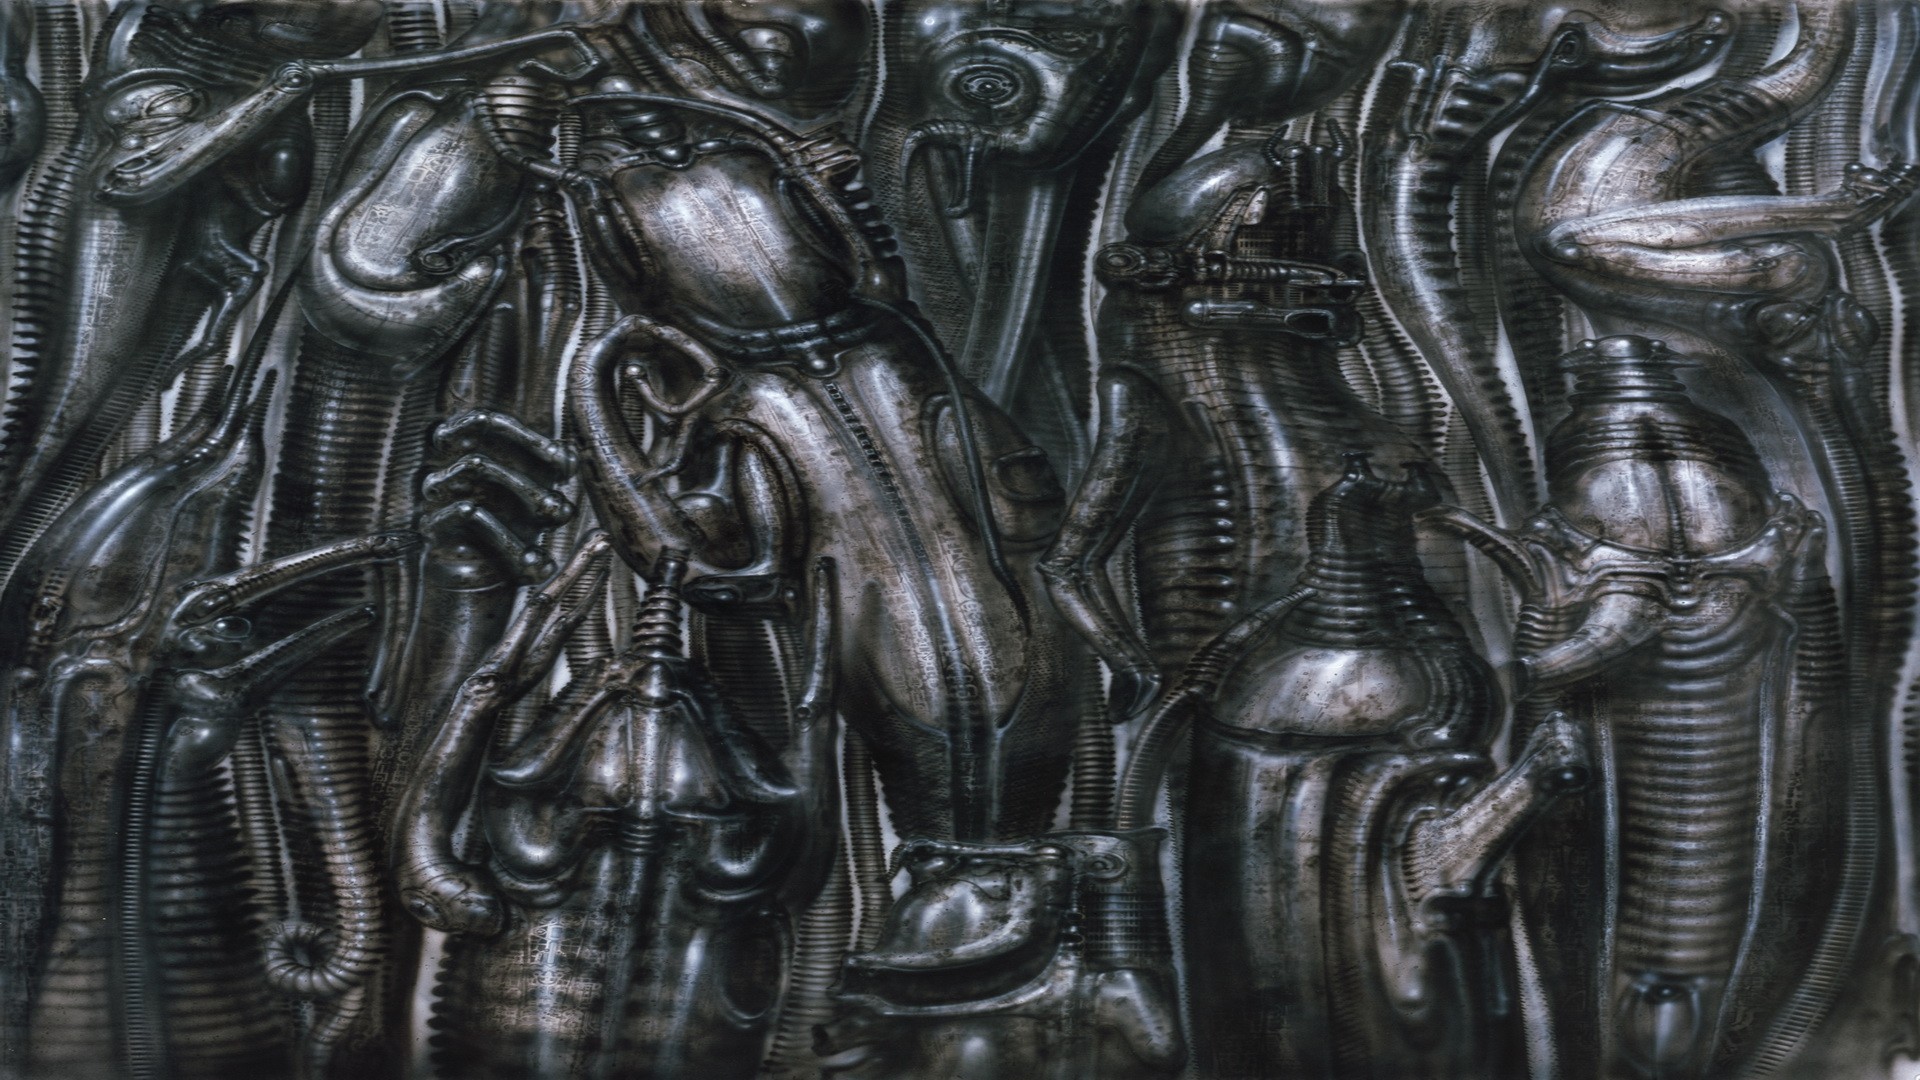 giger wallpaper,relief,art,drawing,stone carving,artwork